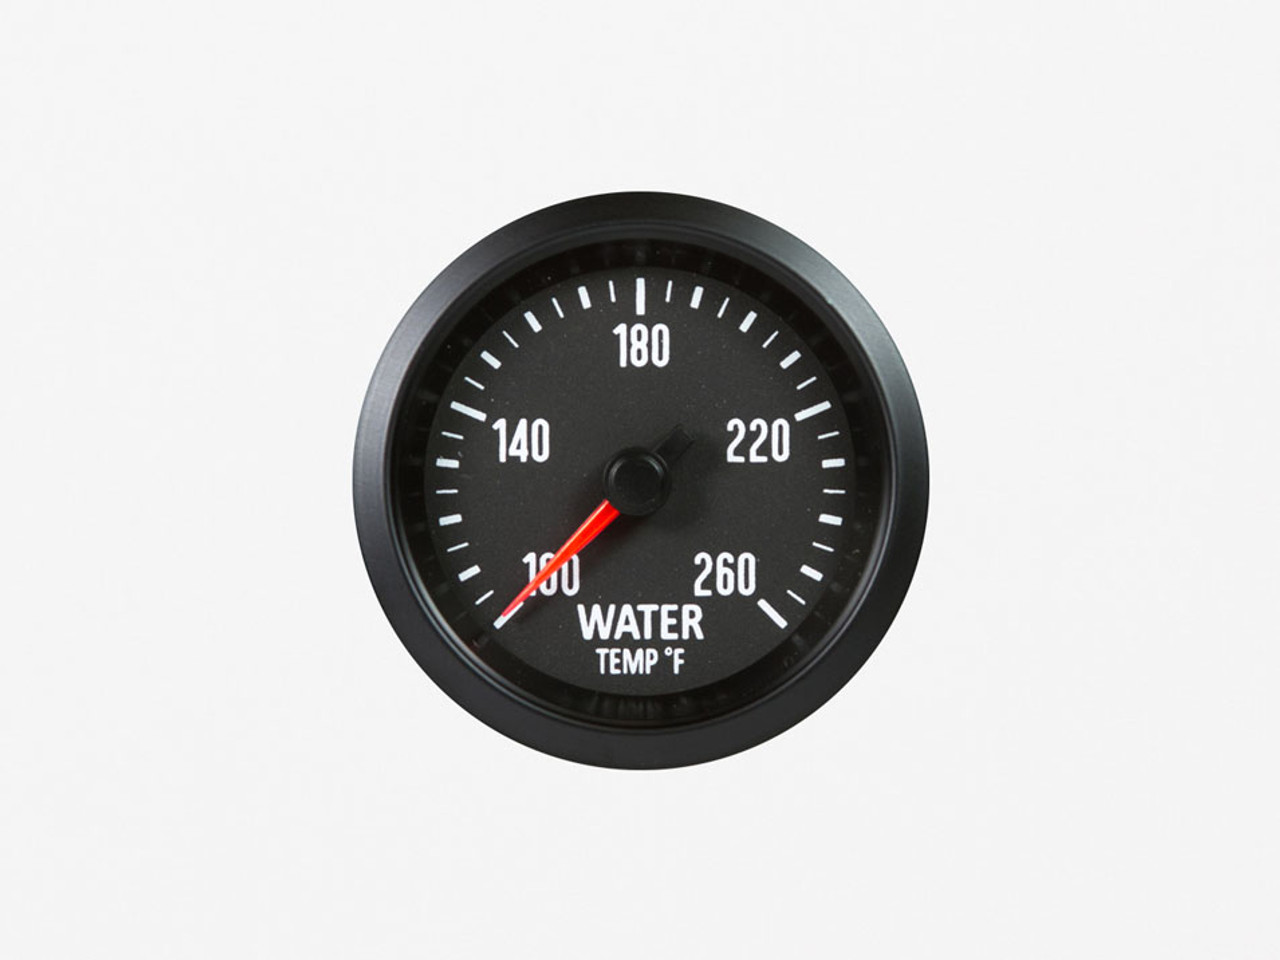 https://cdn11.bigcommerce.com/s-351ed/images/stencil/1280x1280/products/21615/86300/performance_gauges_for_all_vehicles_marshall_instruments_-_water_temperature_f_black_bezel_PRVX7H4_21615__49675.1679013506.jpg?c=2